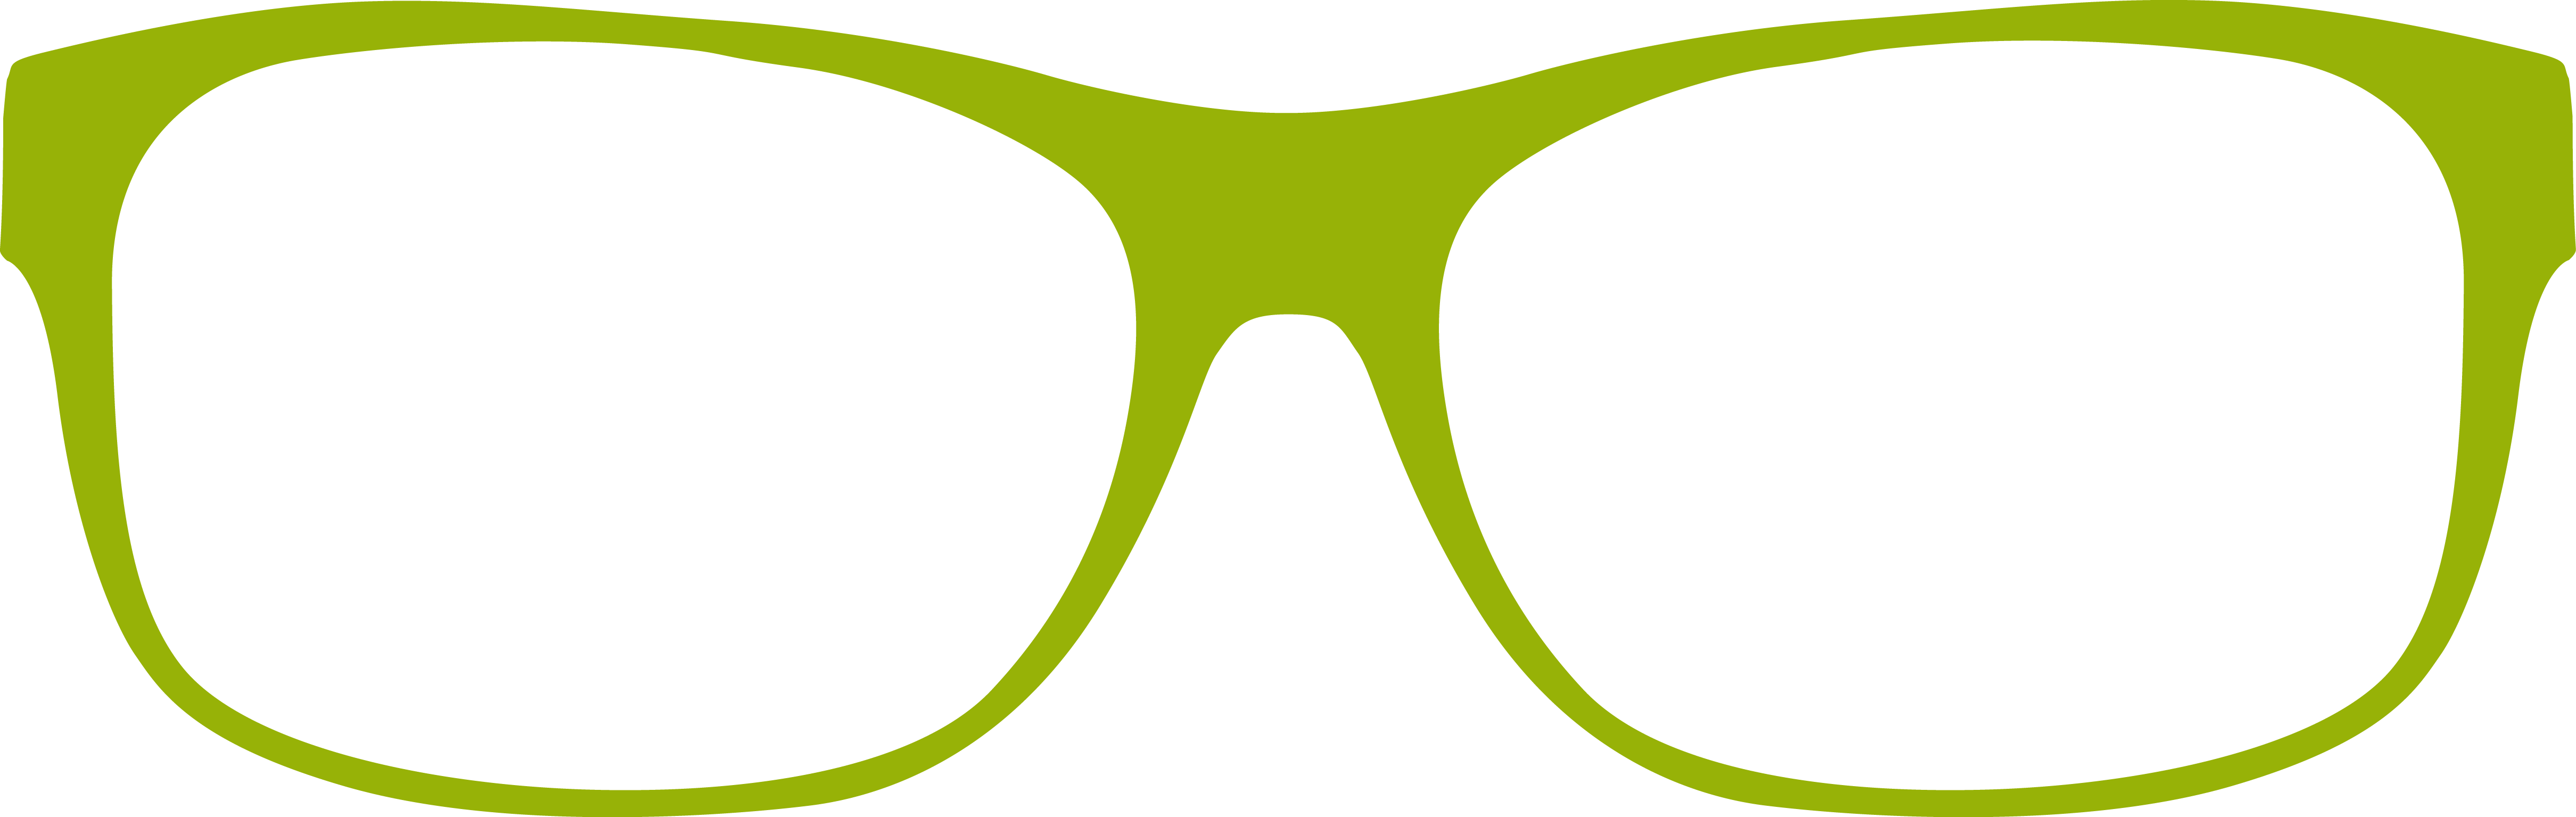 vector free download glasses - photo #43